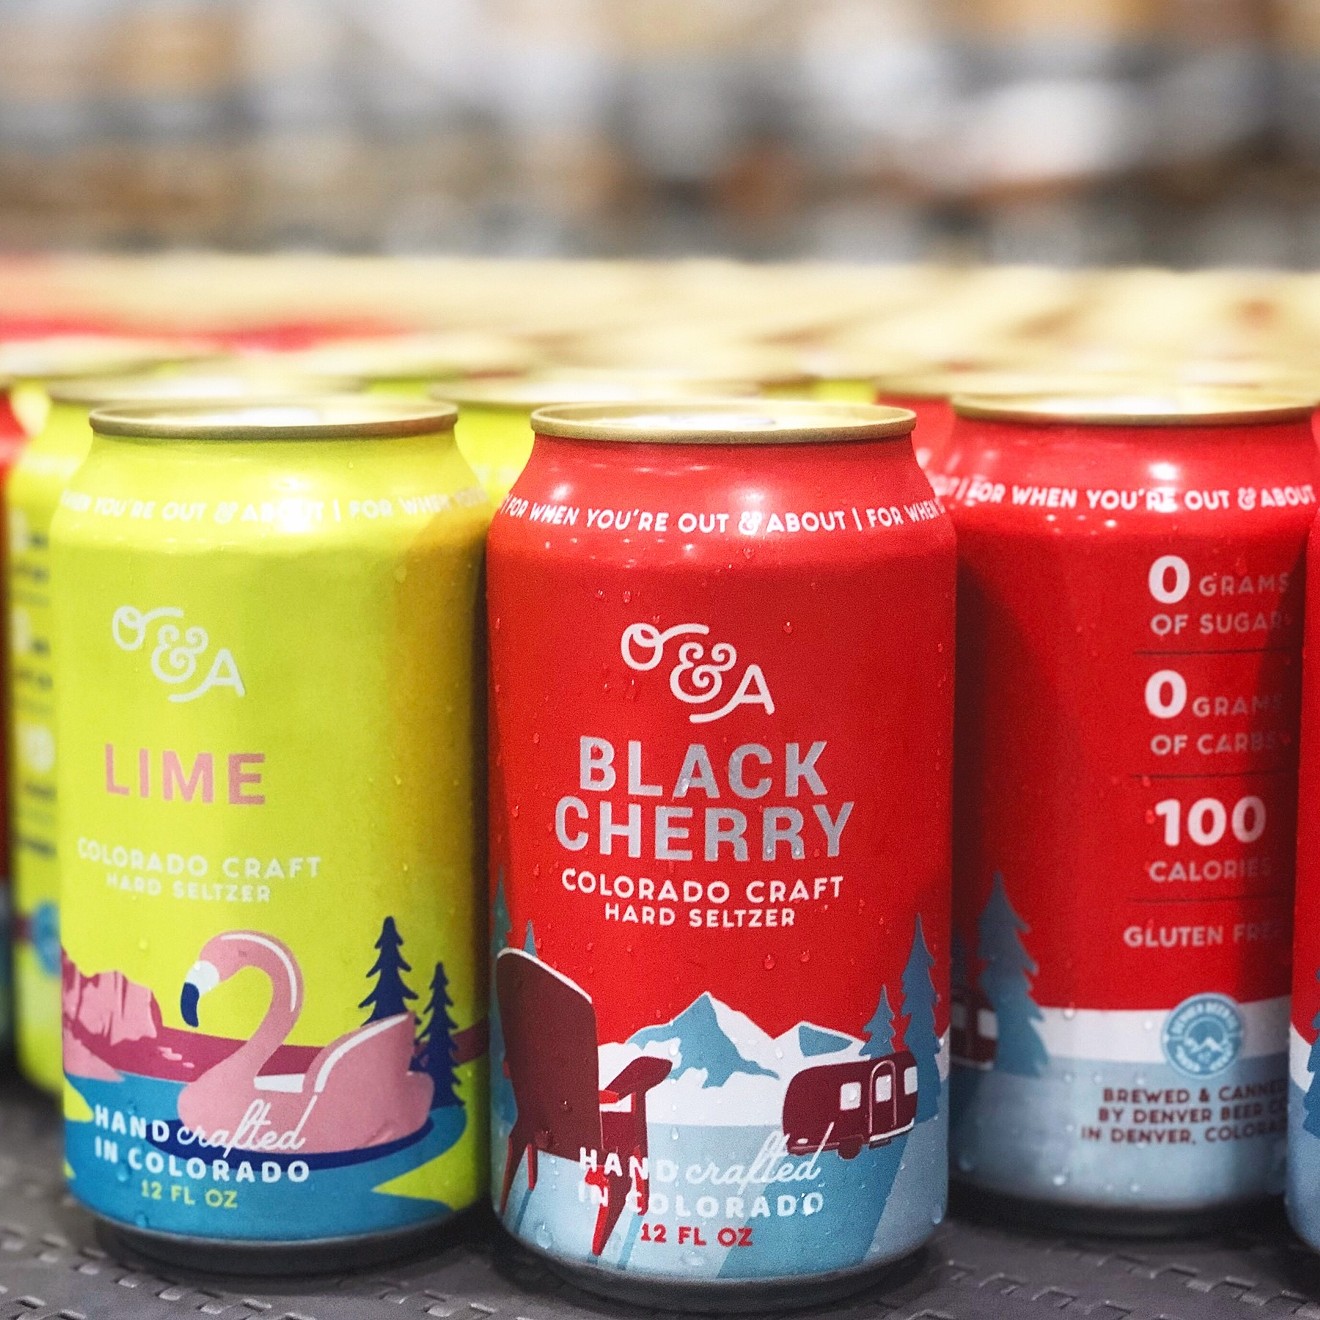 Denver Beer Co. is one of a few Colorado breweries packaging hard seltzer.